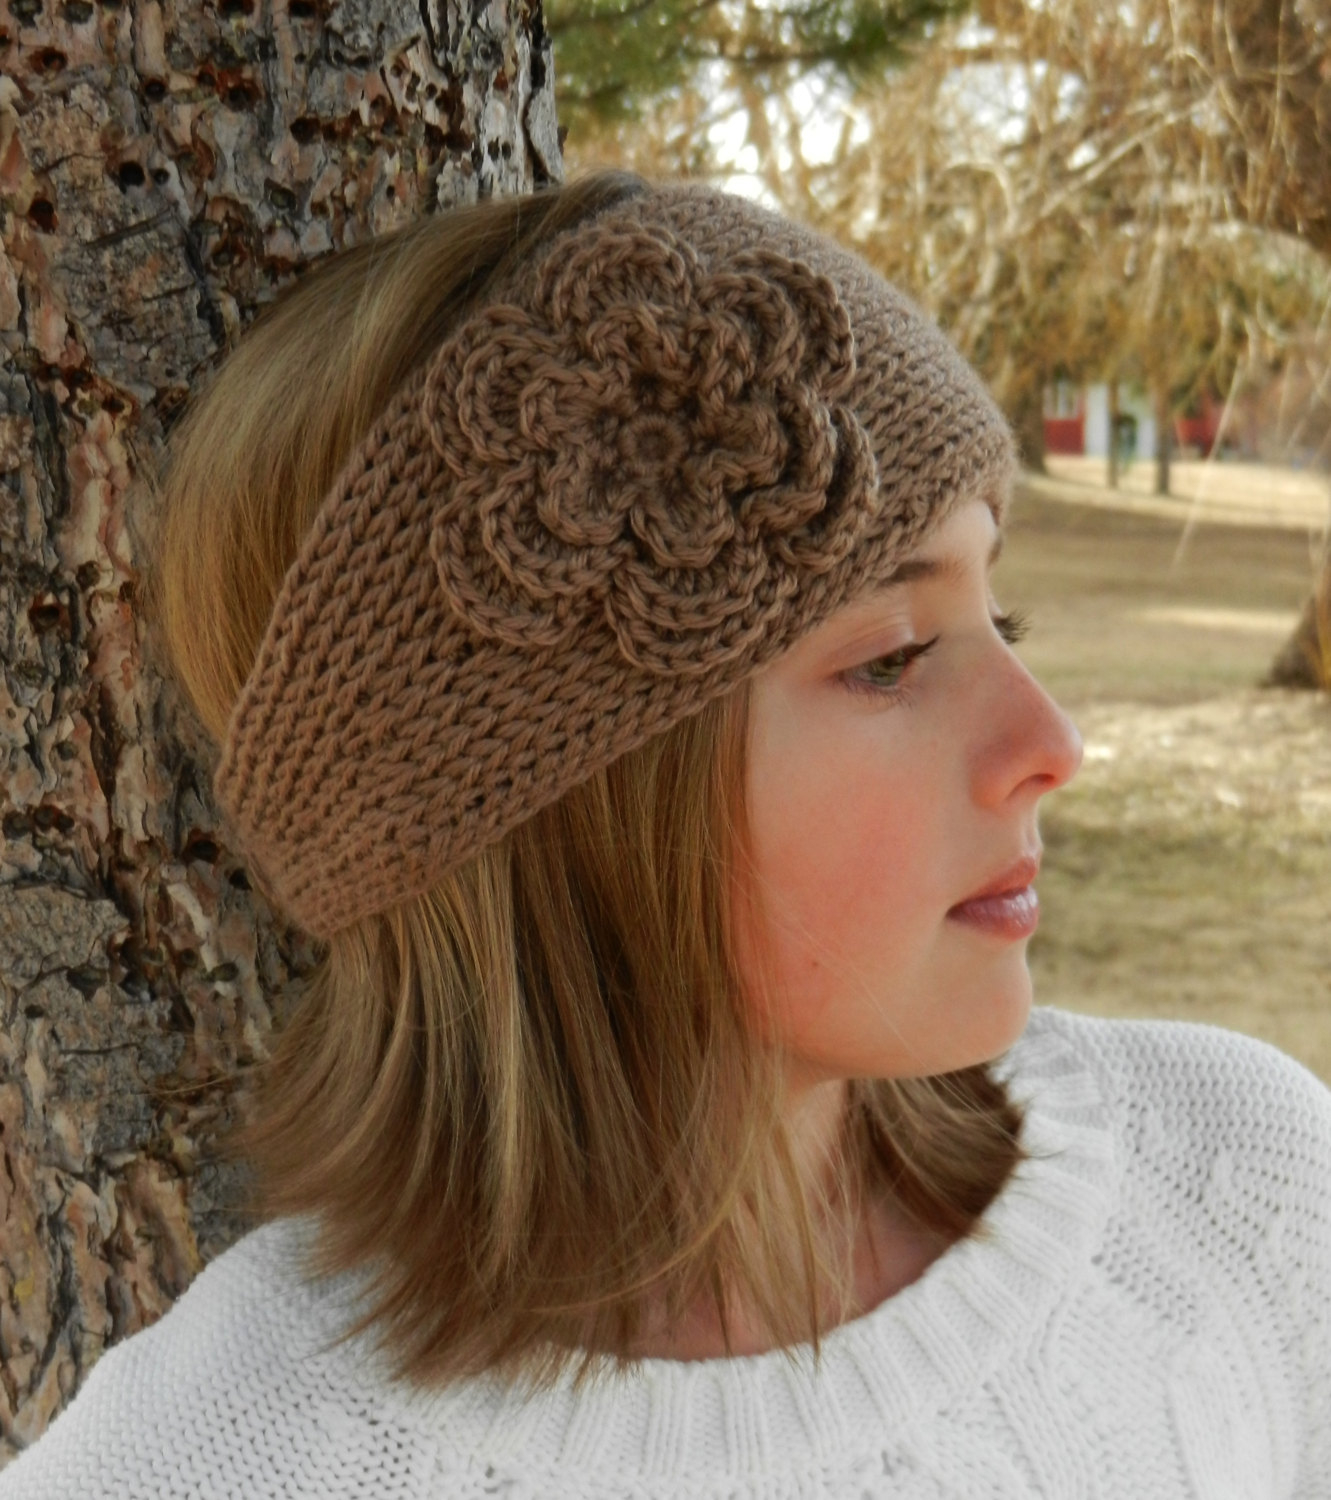 Knit Headband Pattern With Flower Tunisian Knit Look Crochet Headband Pattern With Flower Tunisian Crochet Headband Earwarmer Pattern With Flower Instant Download